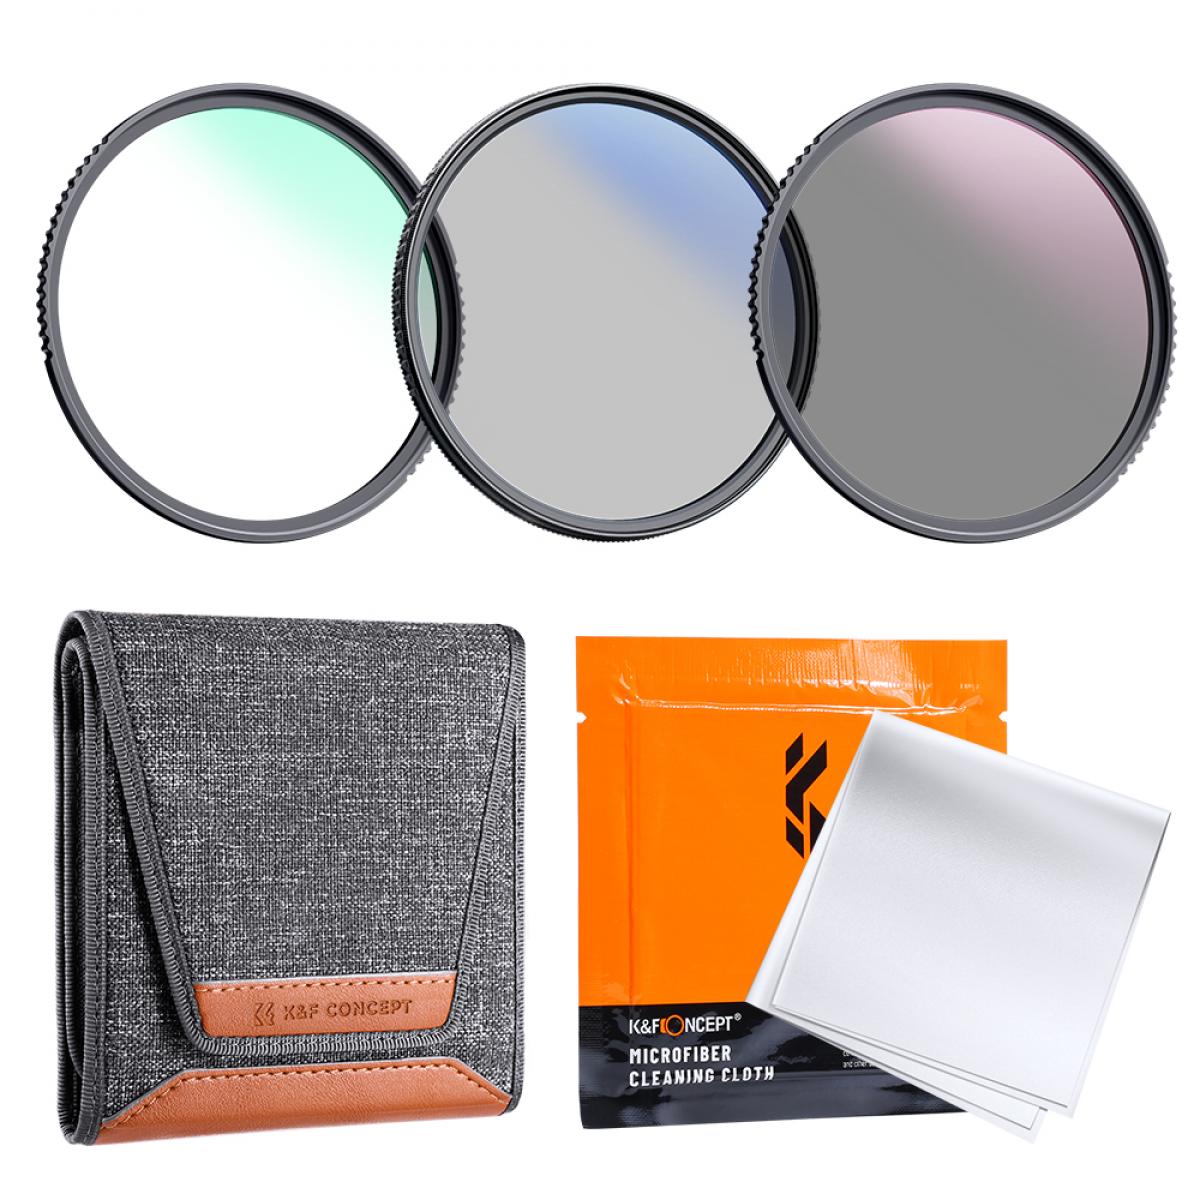 55mm 3pcs Professional Lens Filter Kit (MCUV/CPL/ND4) + Lens Cleaning Cloth+ Filter Pouch for DSLR Camera Lens